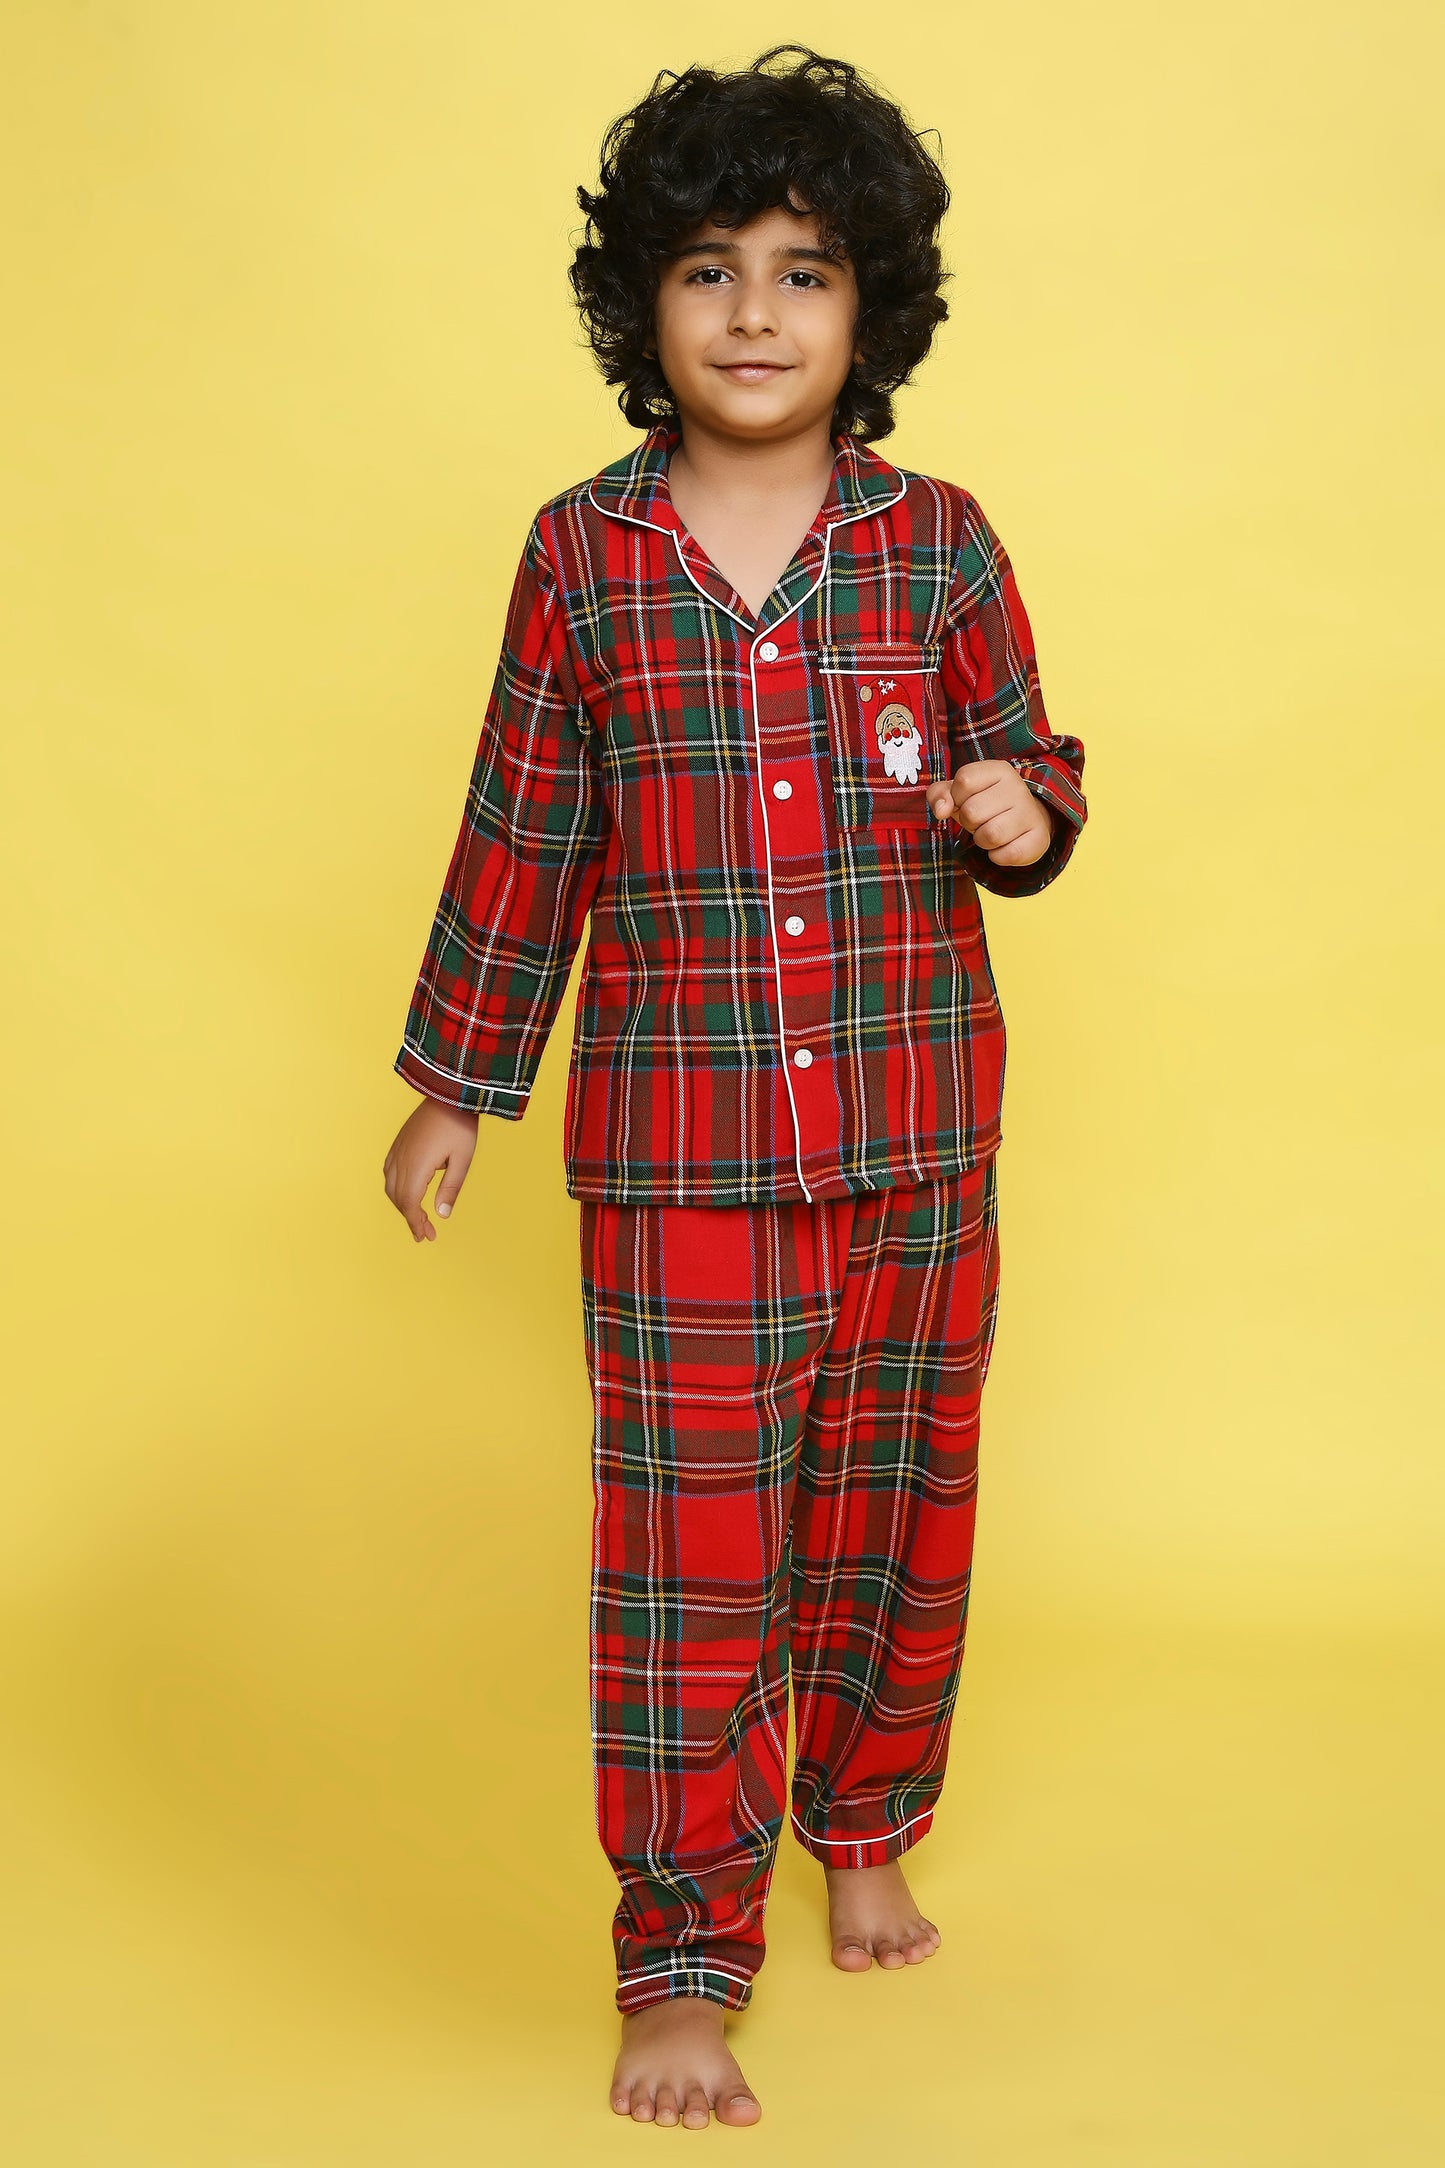 Red, White and Green checks Night Suit with cute Santa clause embroidery on the pocket